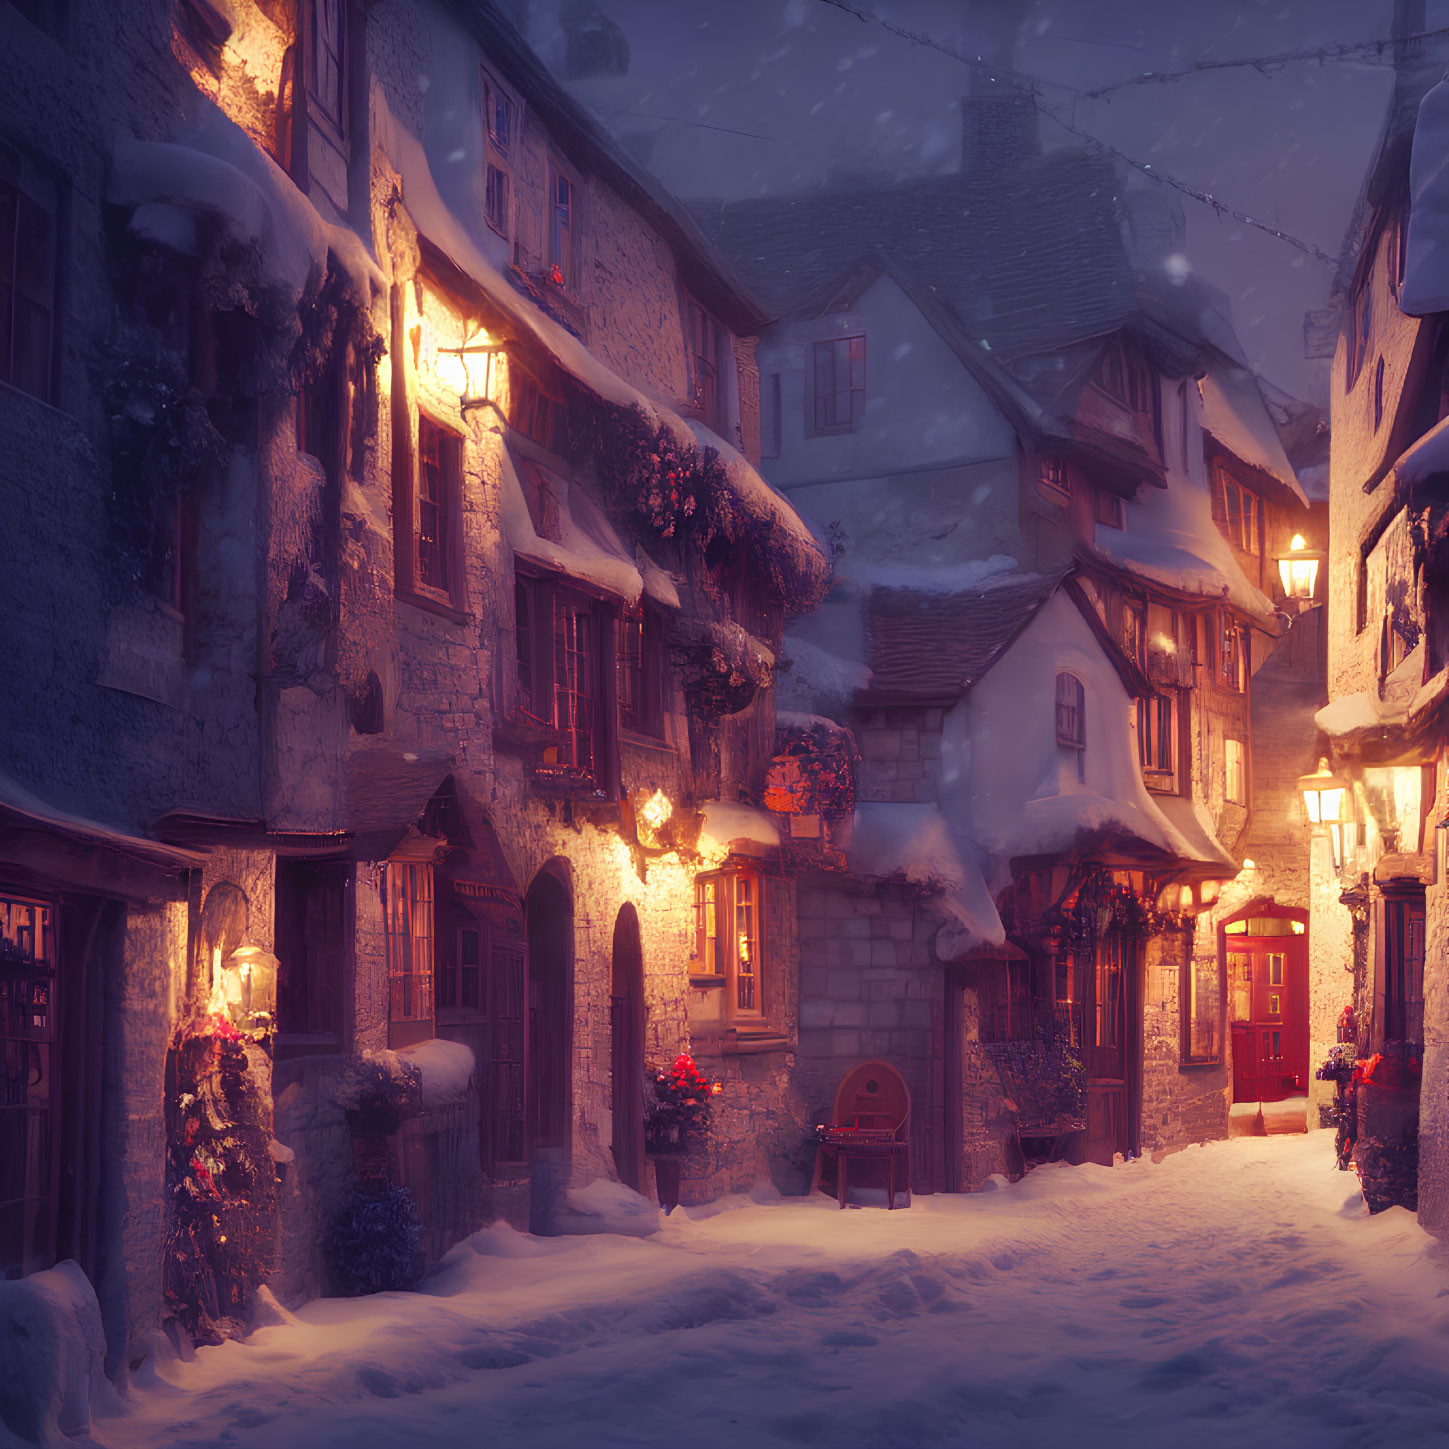 Twilight snow-covered village street with warm glowing lights & holiday decorations